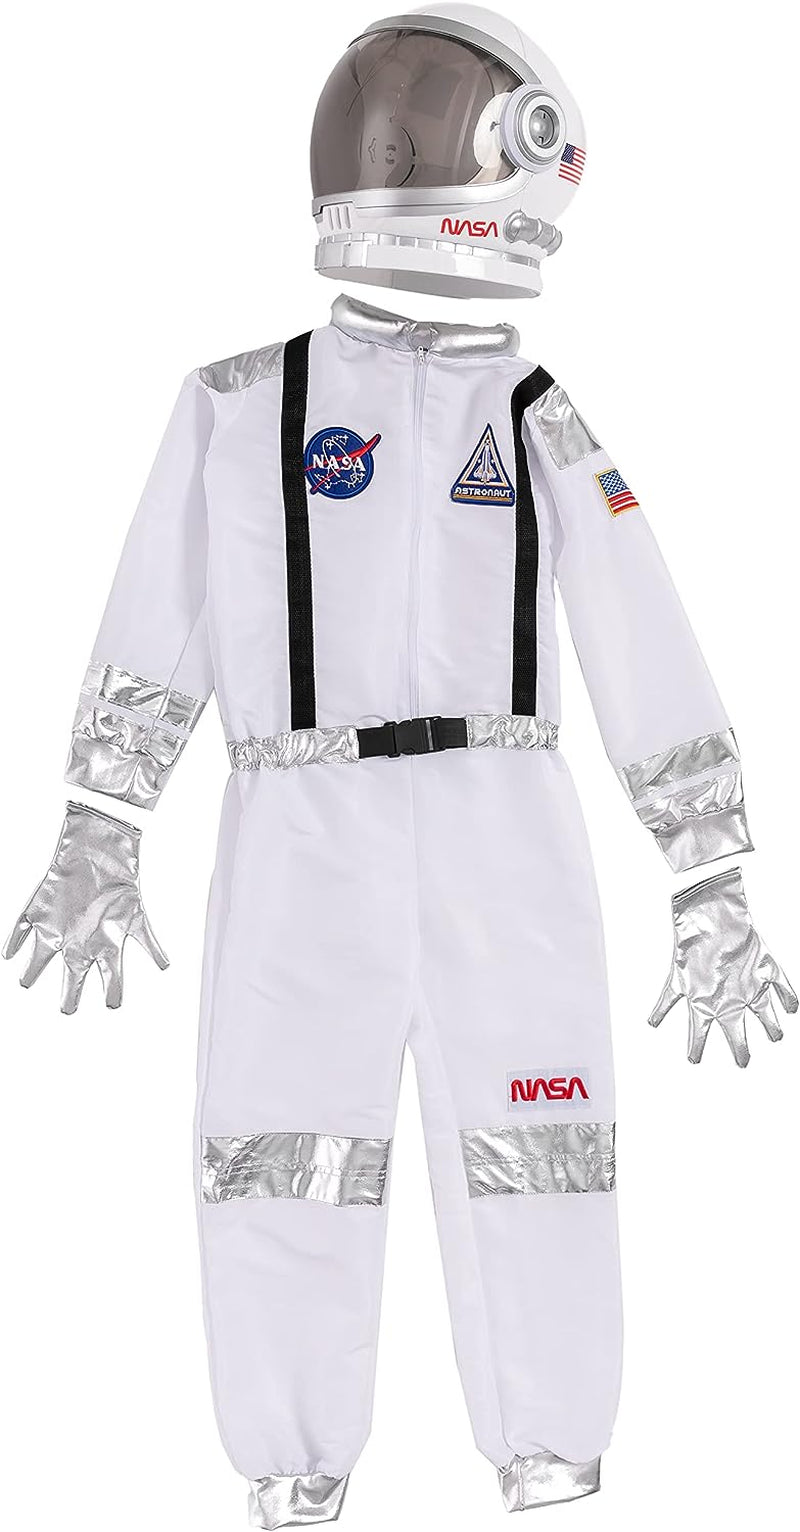 Spooktacular Creations Halloween Child Unisex Astronaut Costume with Silver Stripes for Party Favors (Medium (8-10Yr))  3 years and up   